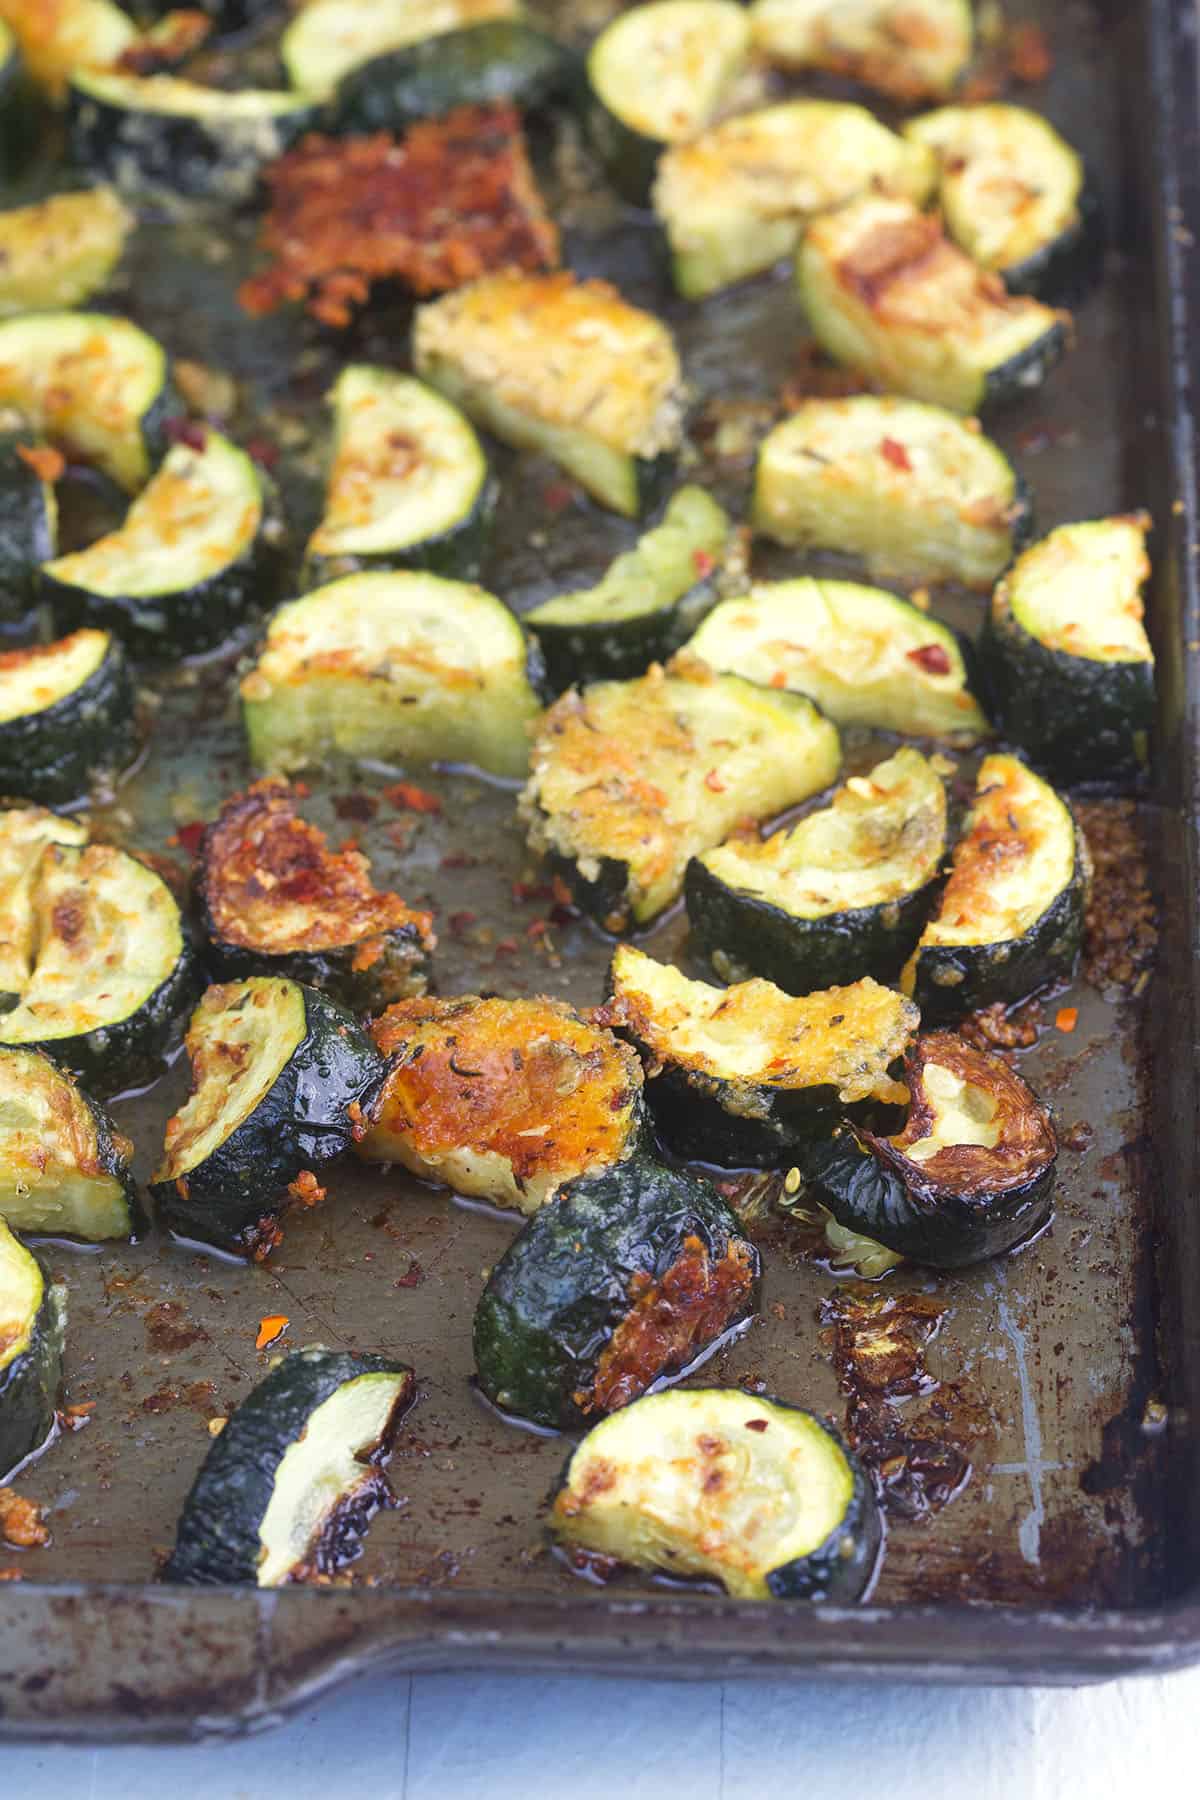 Roasted zucchini is spread on a baking sheet.